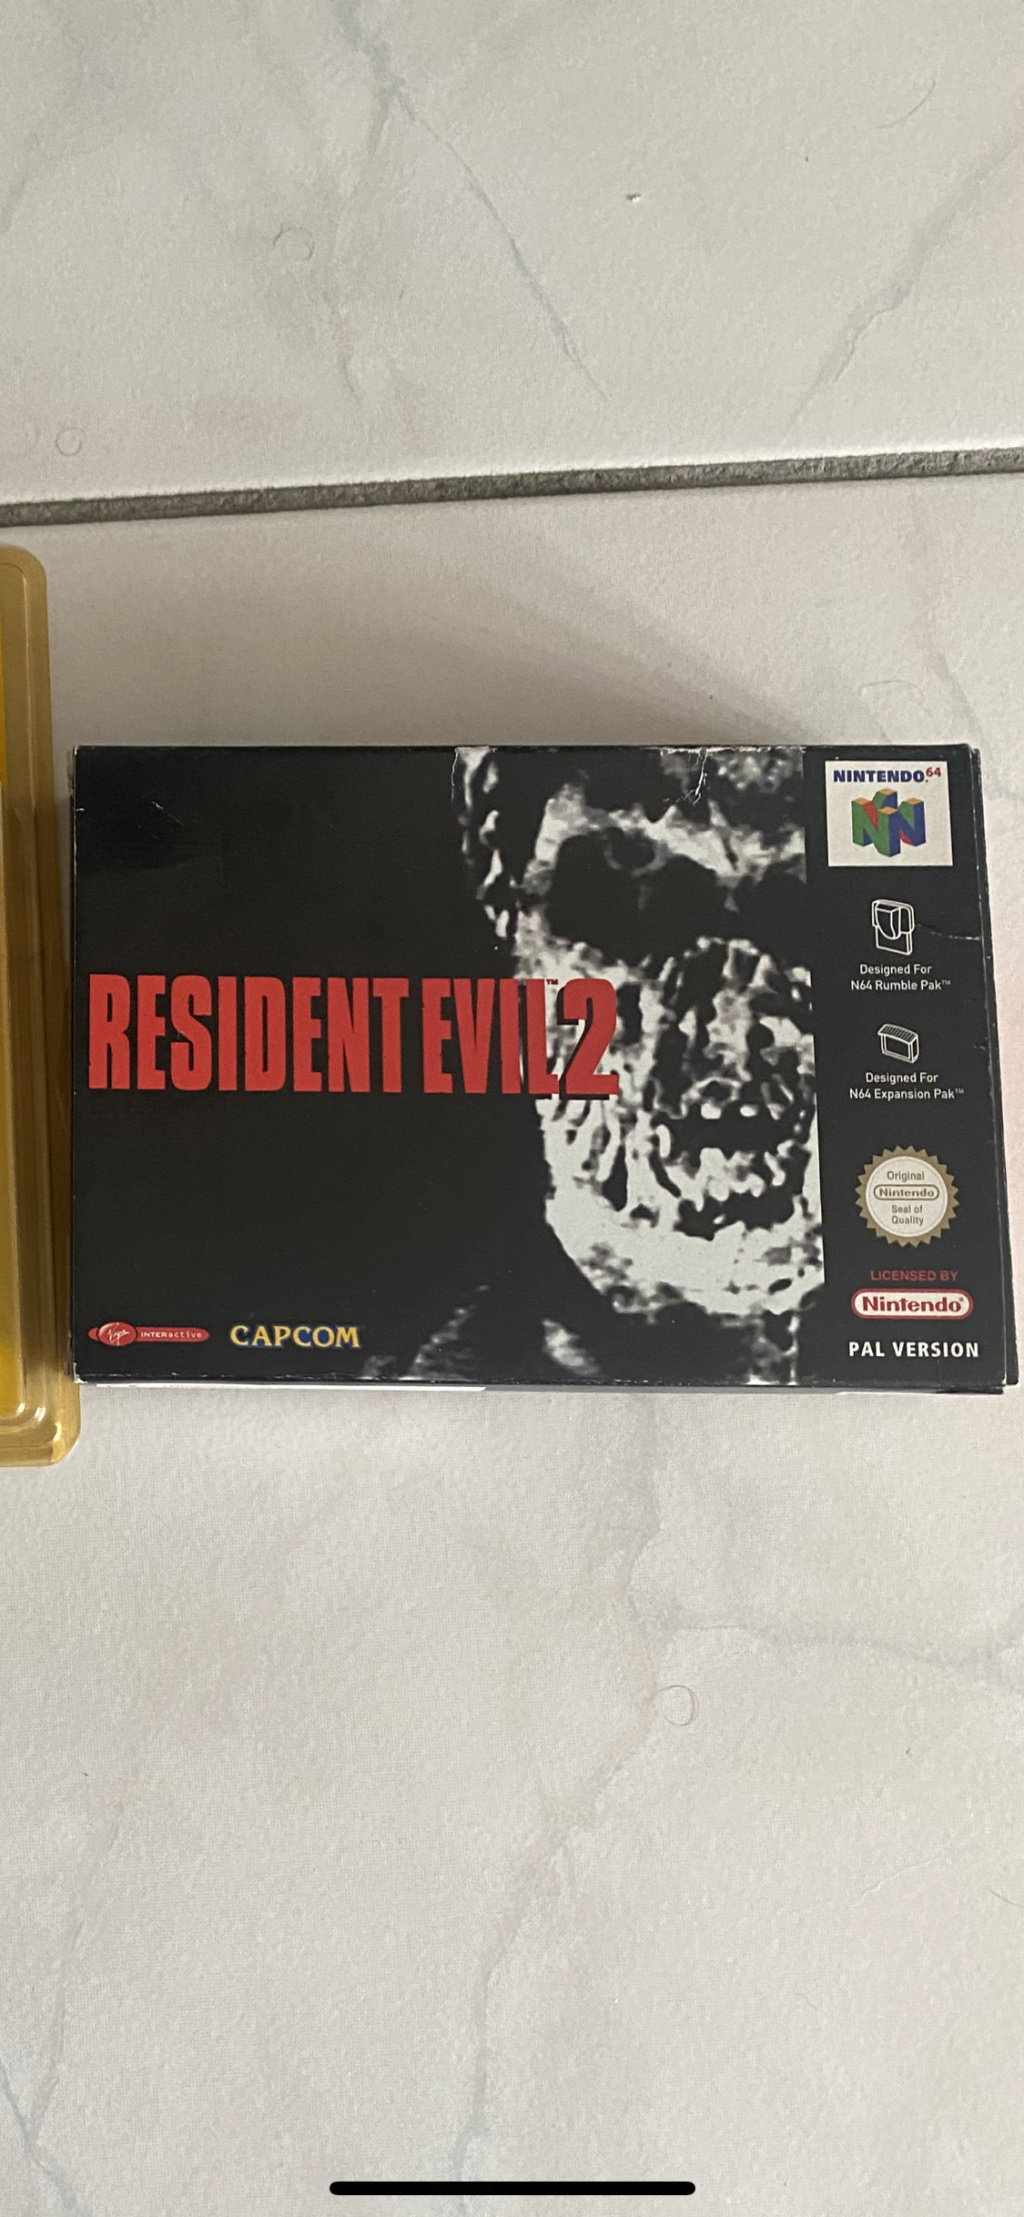 [VENTE] Resident Evil 64 complet + jeux gba neuf  Img_1312